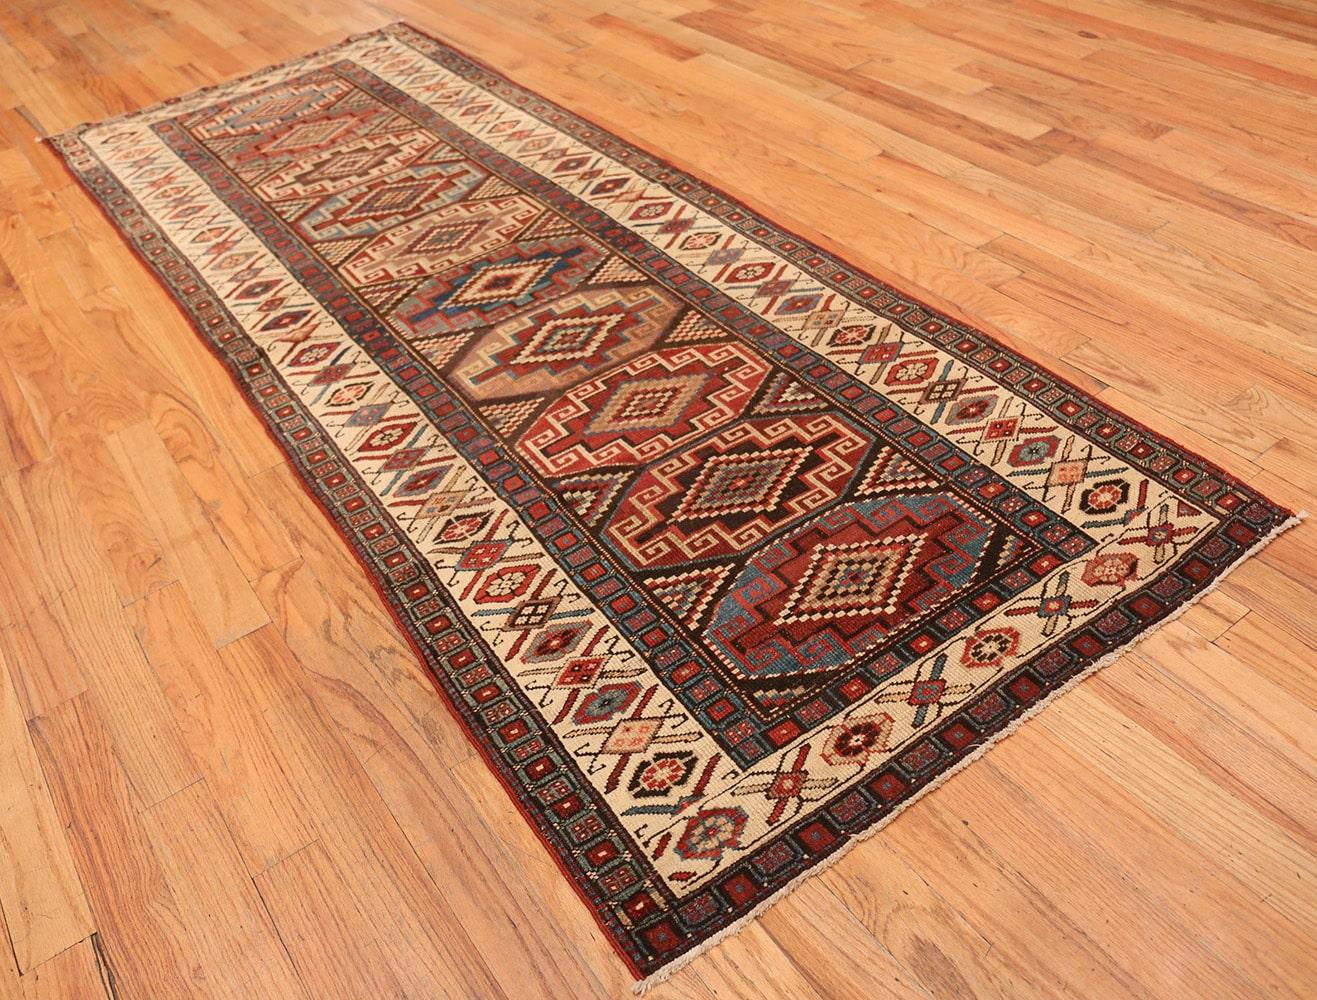 Antique Northwest Persian rug, origin: Persia, circa turn of the 20th century. Size: 3 ft 5 in x 9 ft 3 in (1.04 m x 2.82 m)

Here is a truly beautiful antique oriental rug - an antique Northwest Persian rug that was woven in Persia circa the turn